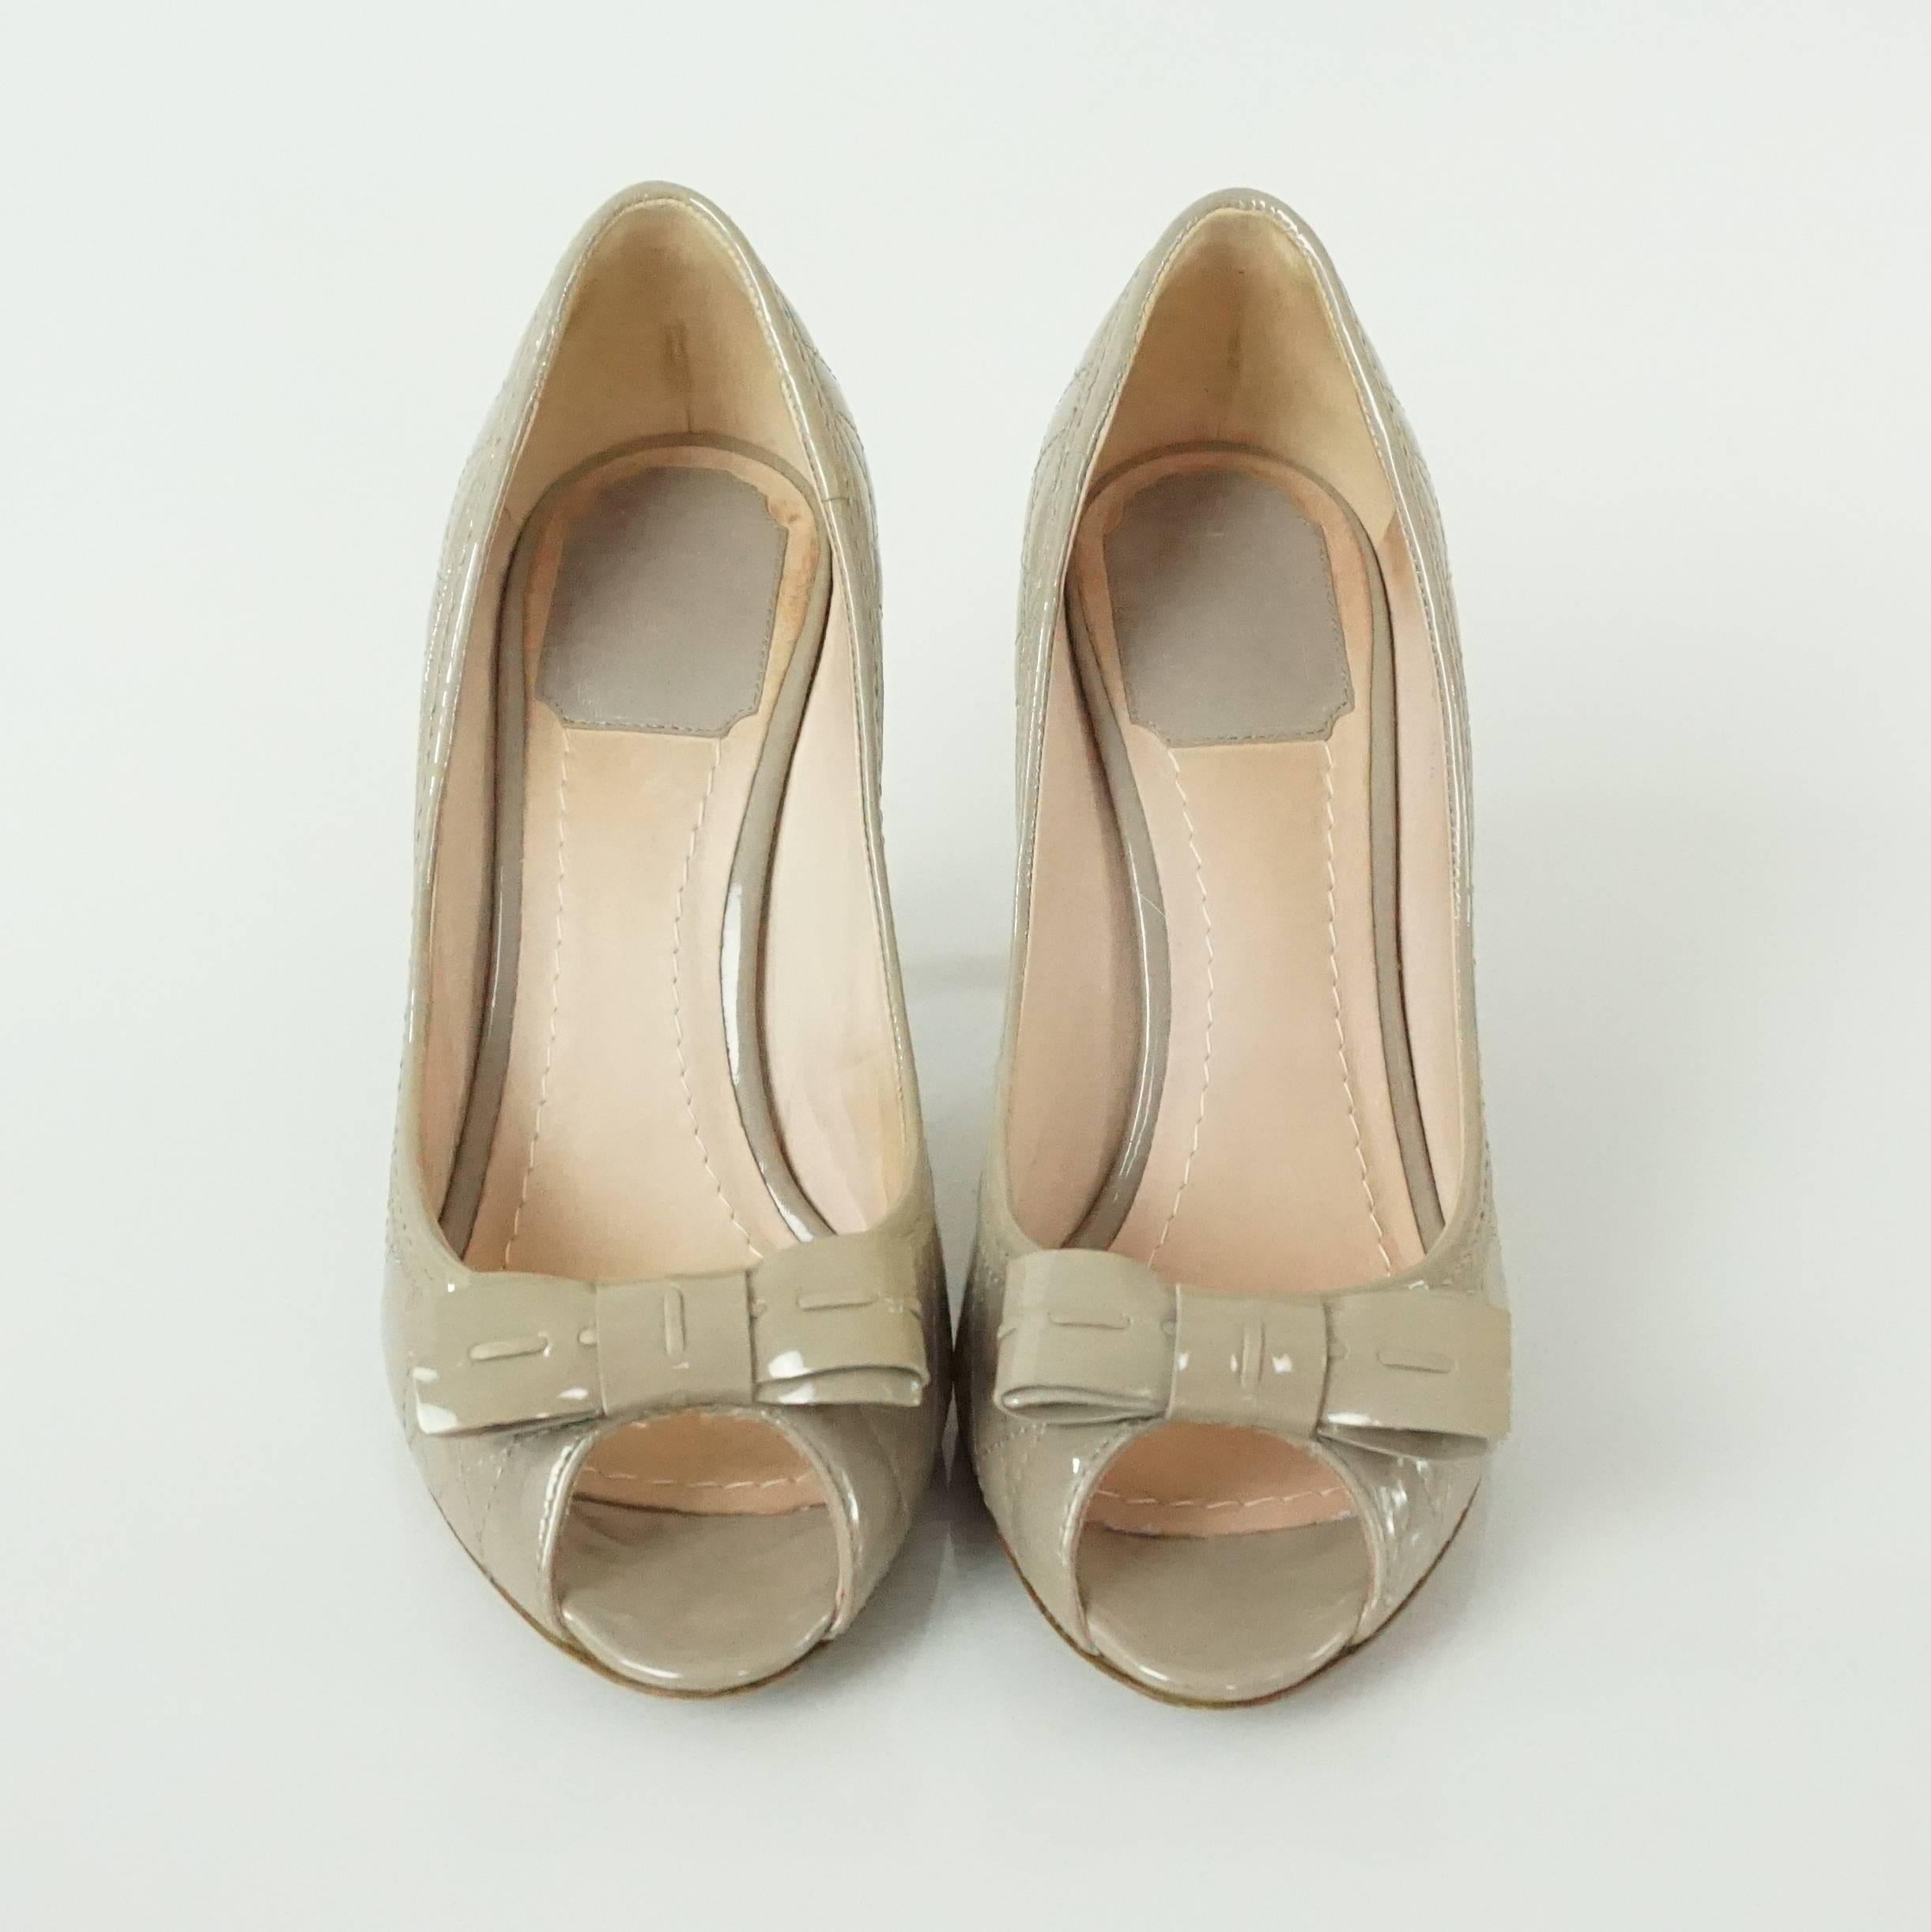 Brown Christian Dior Taupe Patent Leather Peeptoe - 36.5